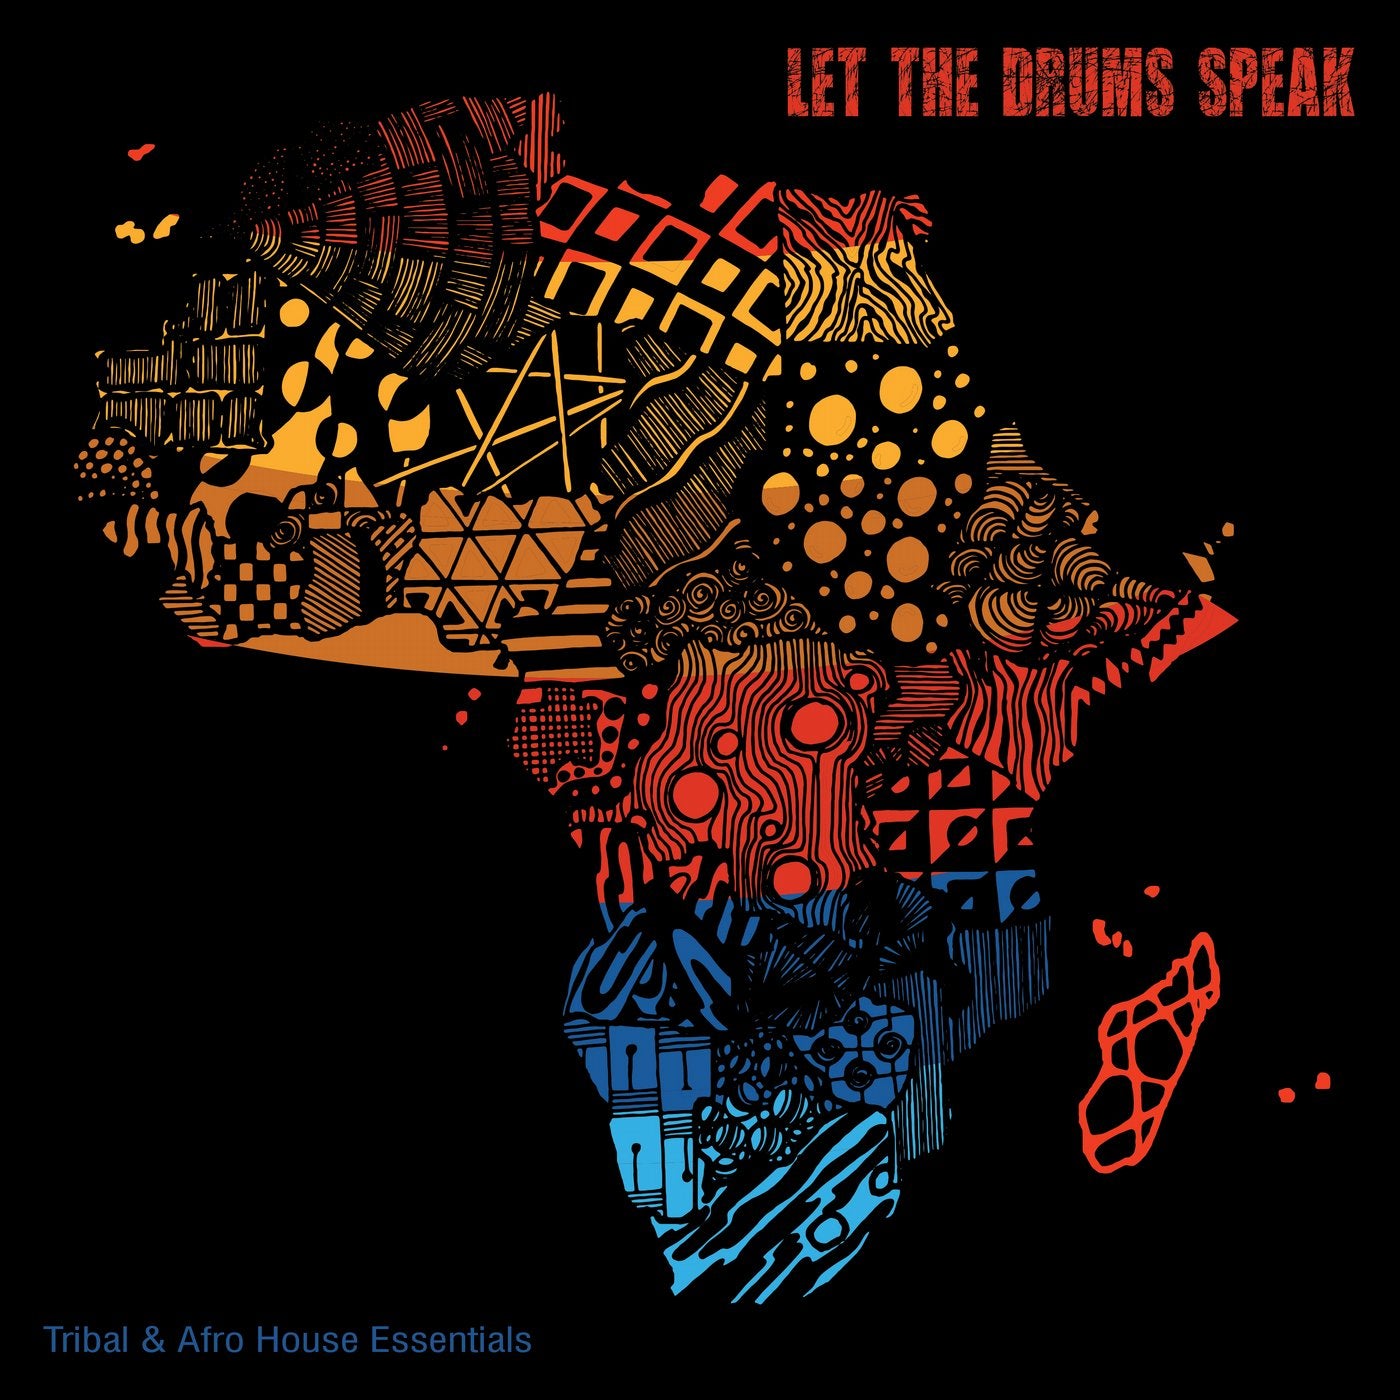 Let the Drums Speak: Tribal & Afro House Essentials